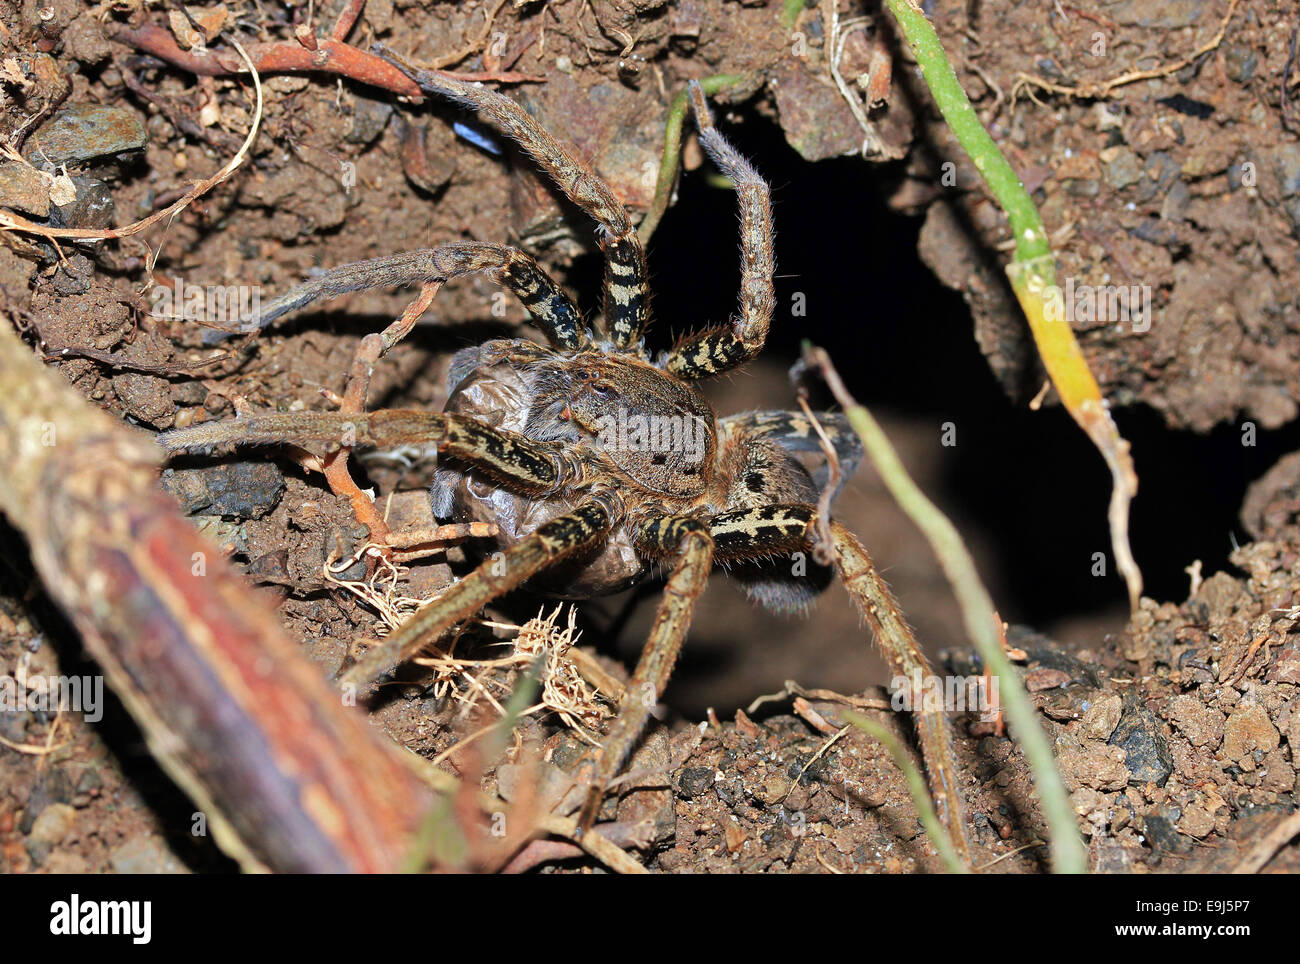 Big Unidentified Spider at the Entrance of Its Burrow, Drake Bay, Costa Rica Stock Photo